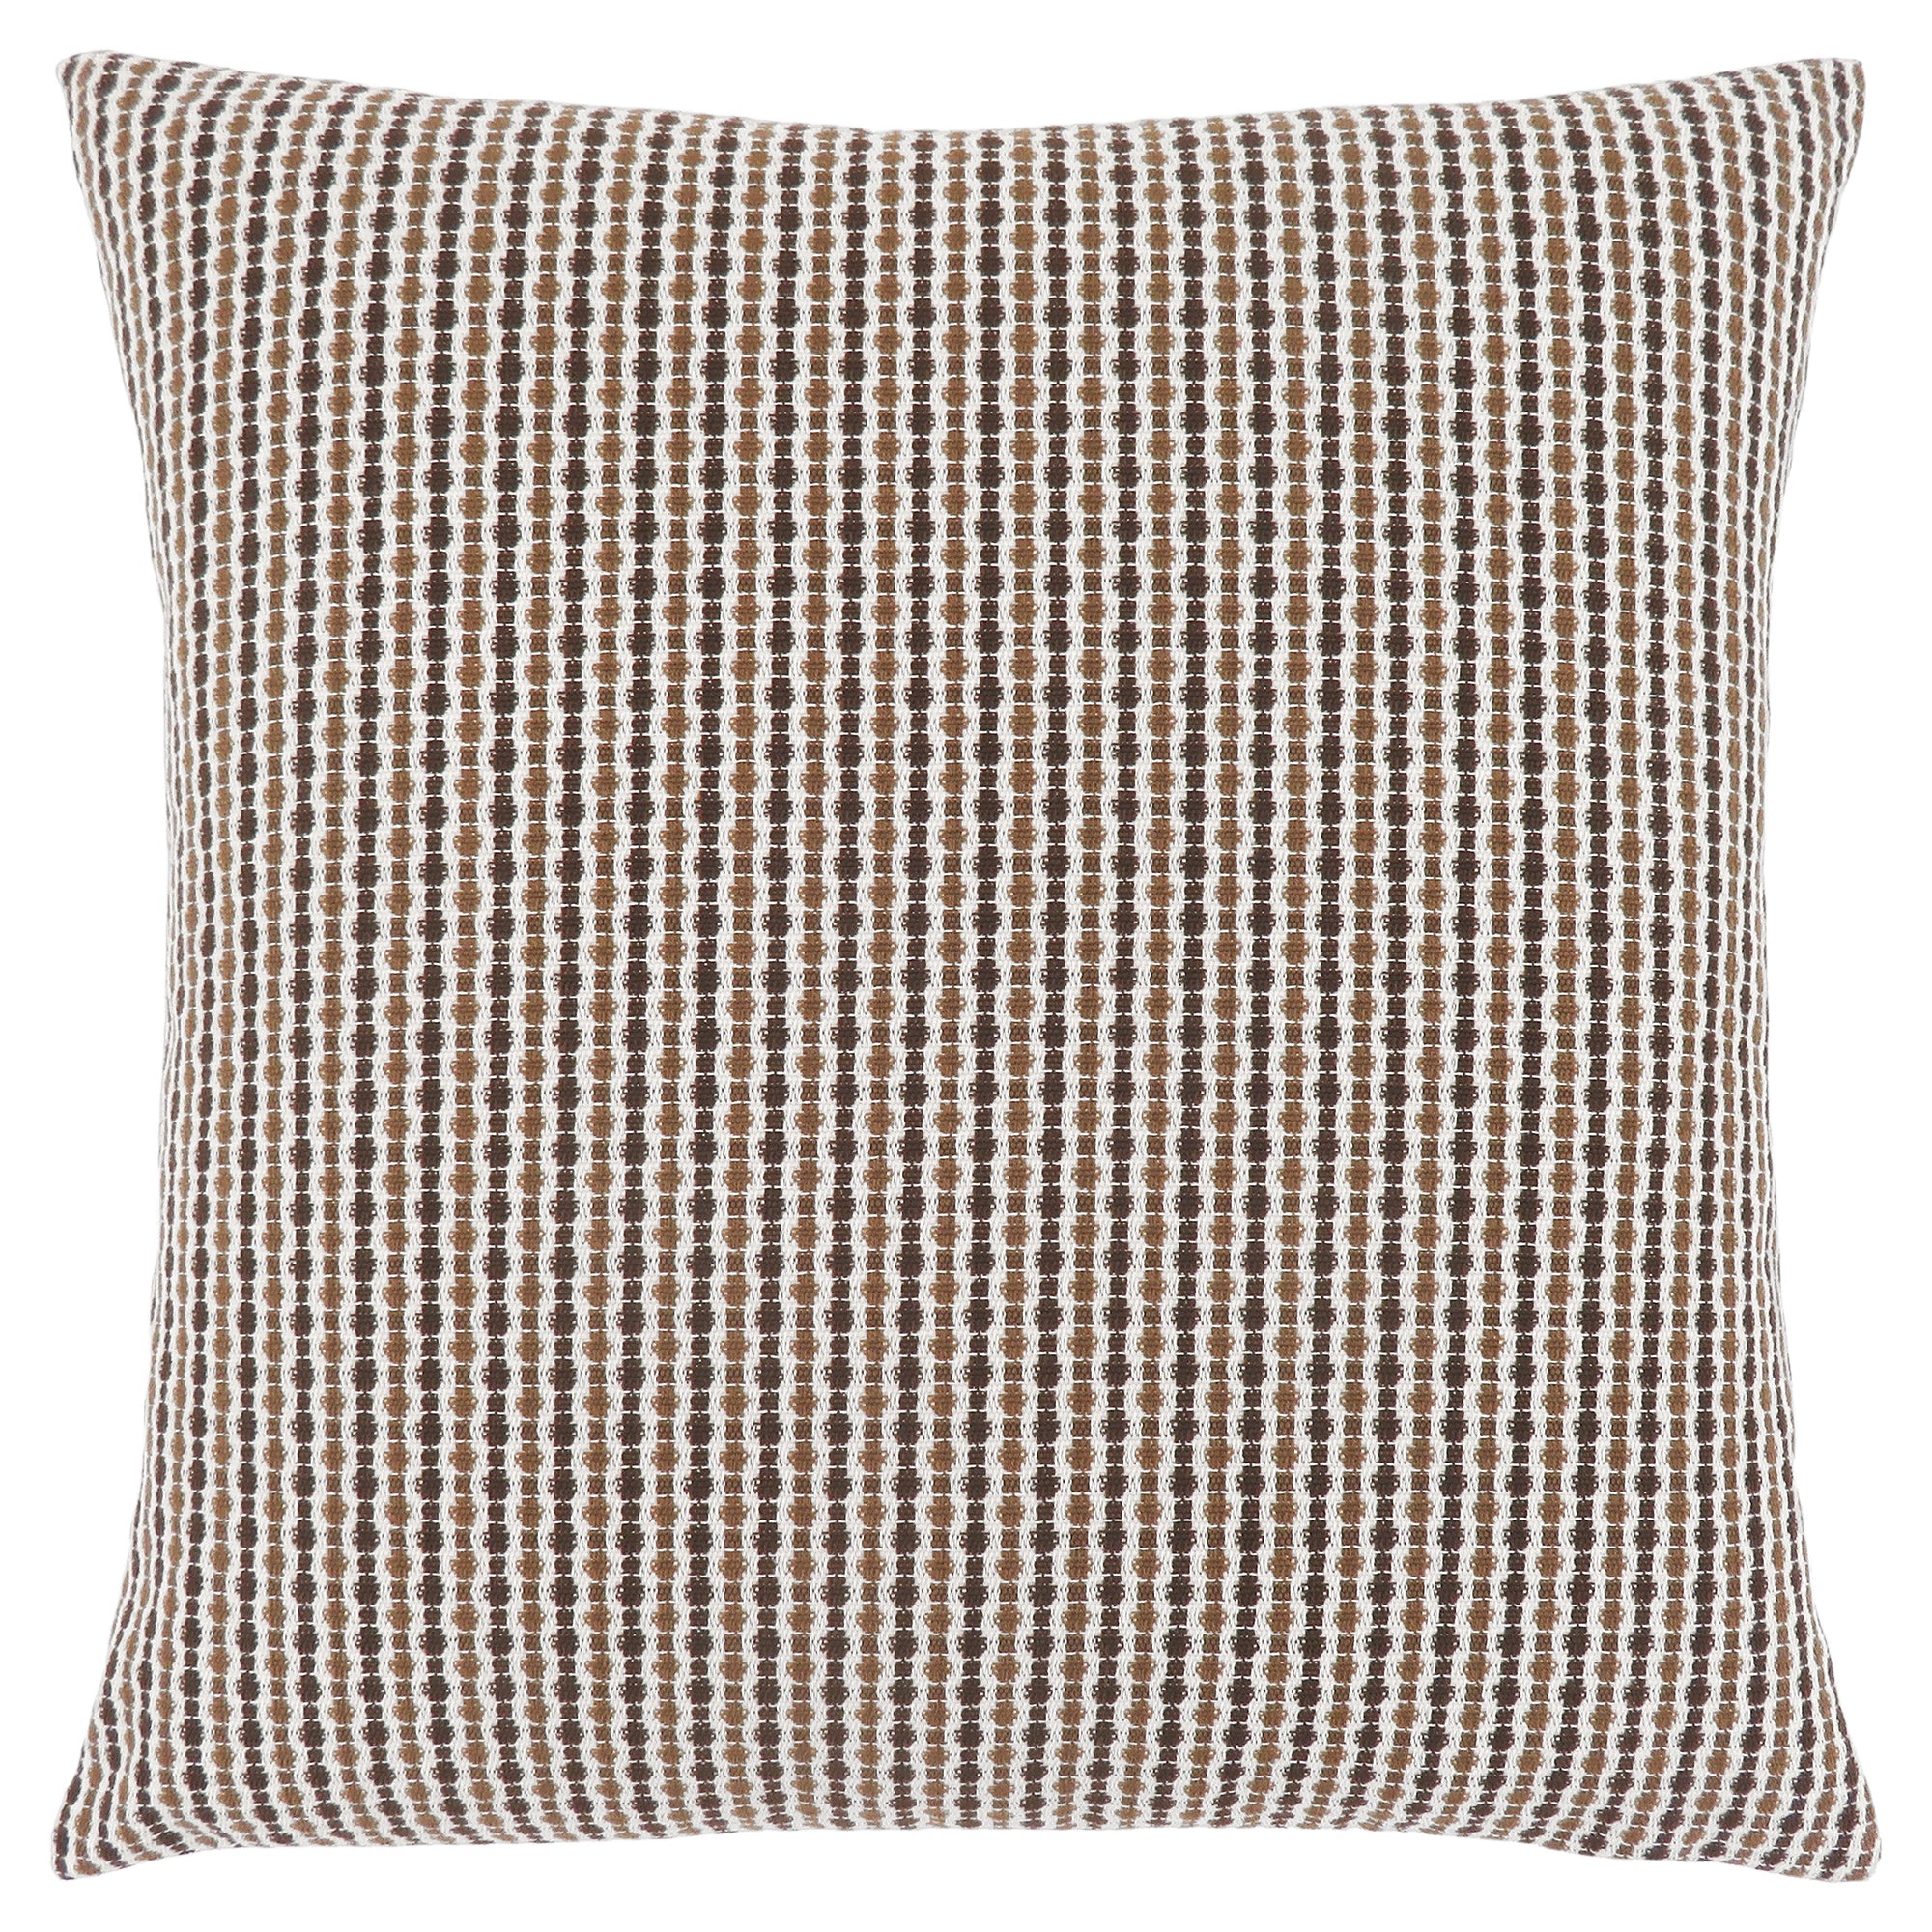 MN-509238    Pillows, 18 X 18 Square, Insert Included, Decorative Throw, Accent, Sofa, Couch, Bed, Soft Polyester Woven Fabric, Hypoallergenic Soft Polyester Insert, Light And Dark Brown, Abstract Dot Design, Classic Dot Design, Classic